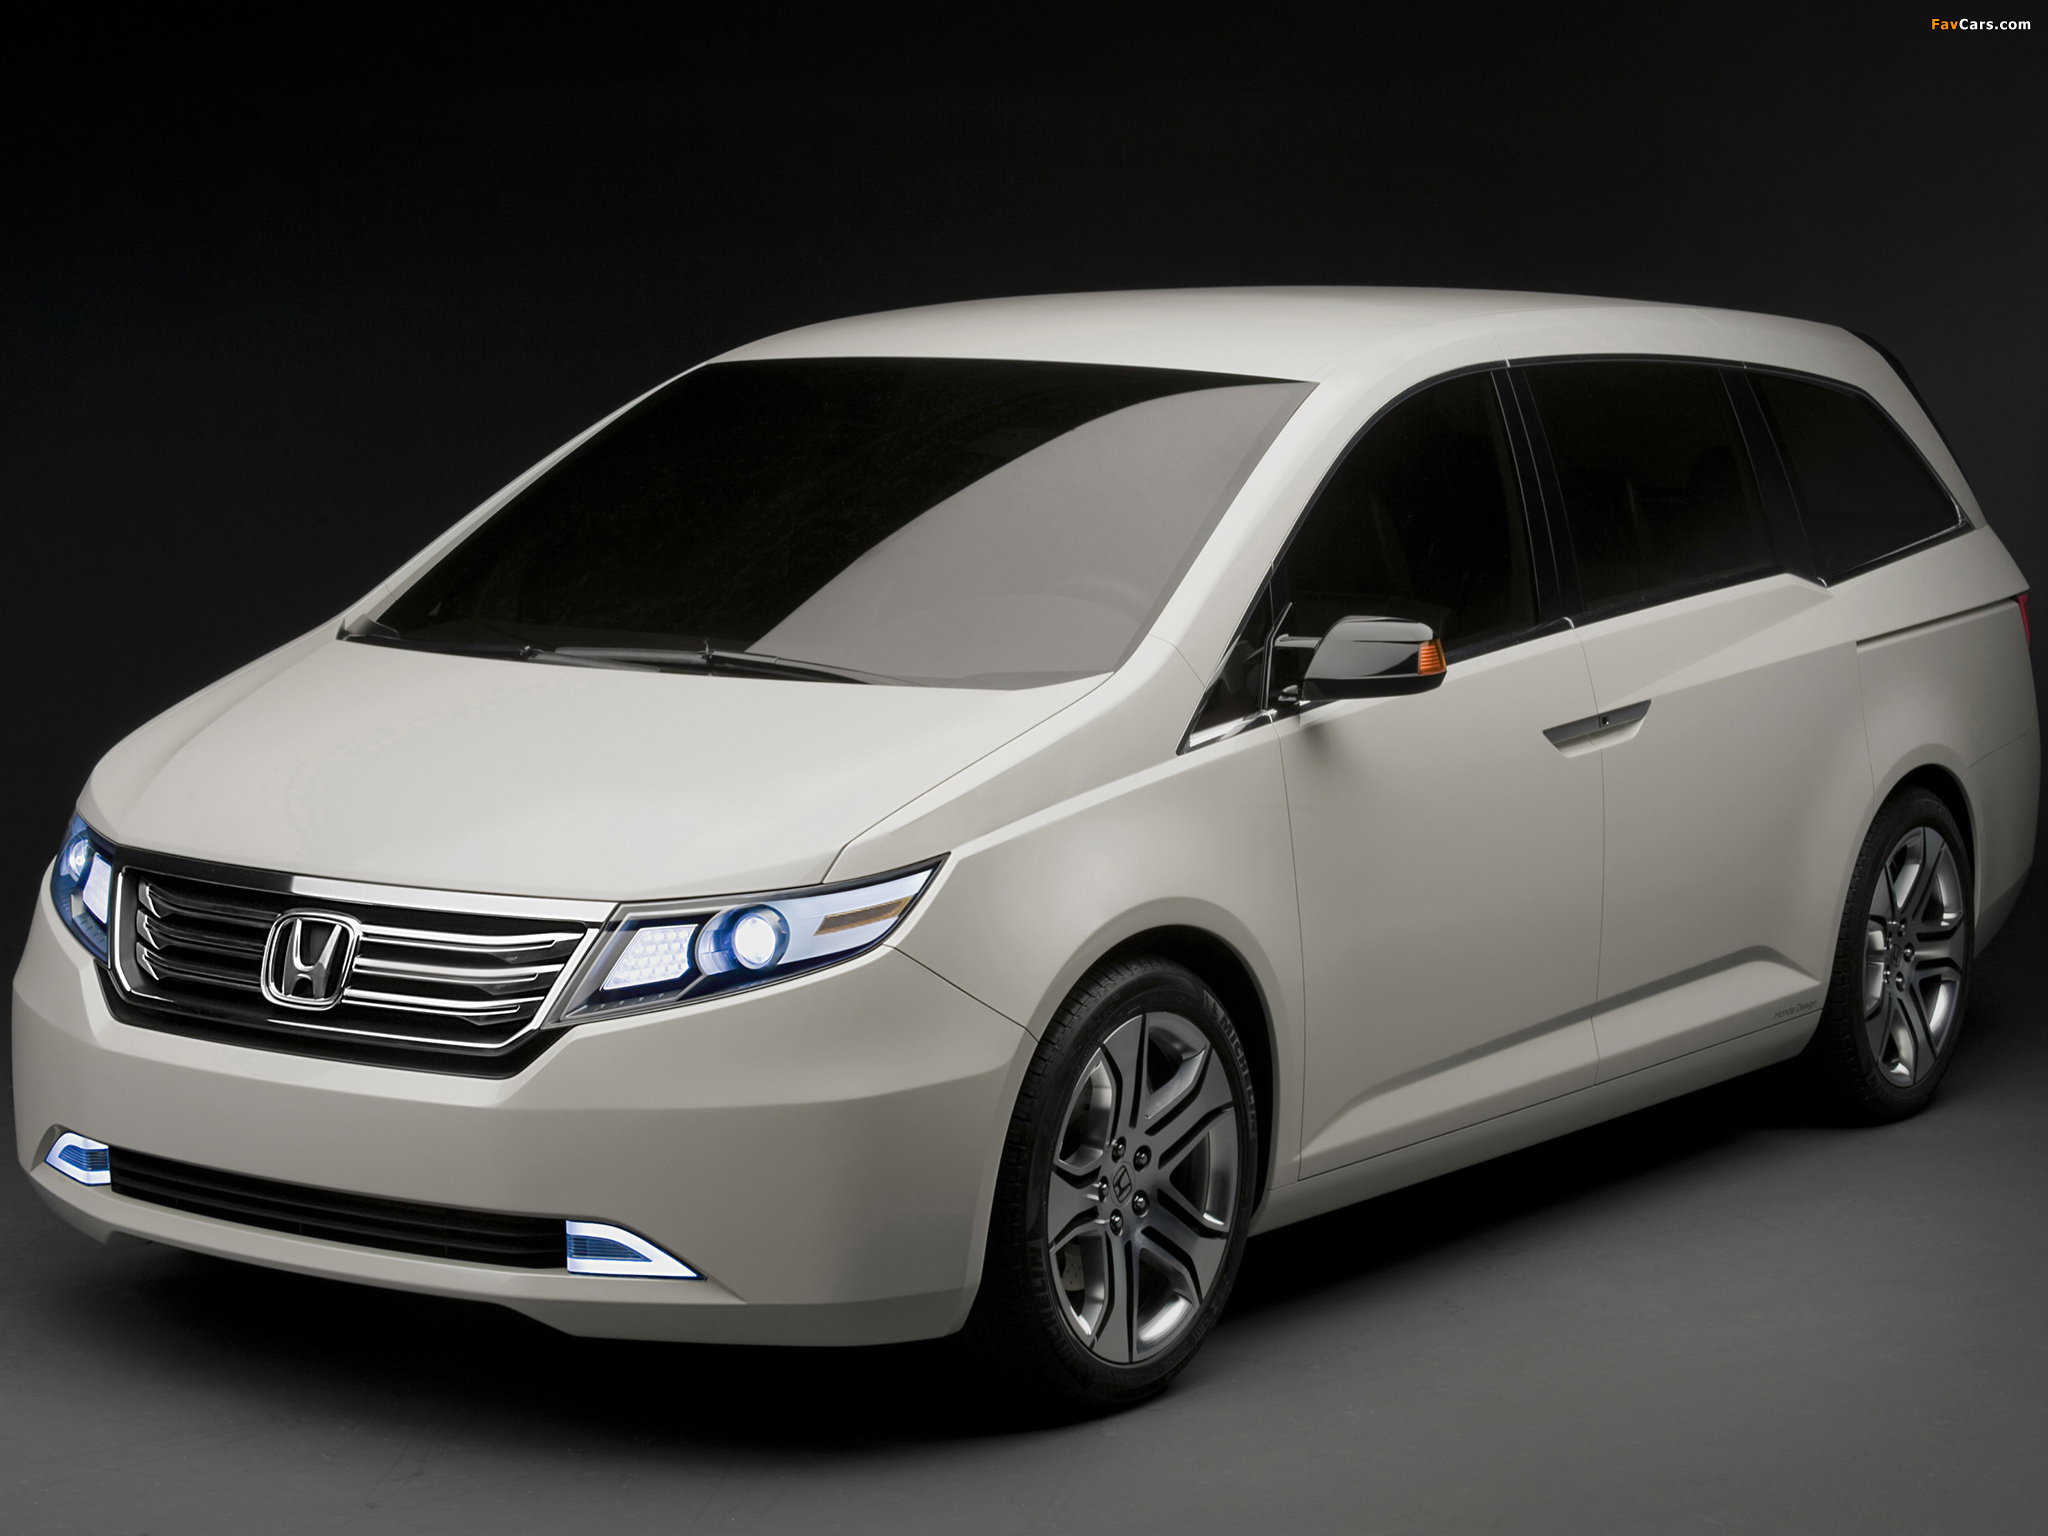 Honda Odyssey Concept 2010 pictures (2048 x 1536)